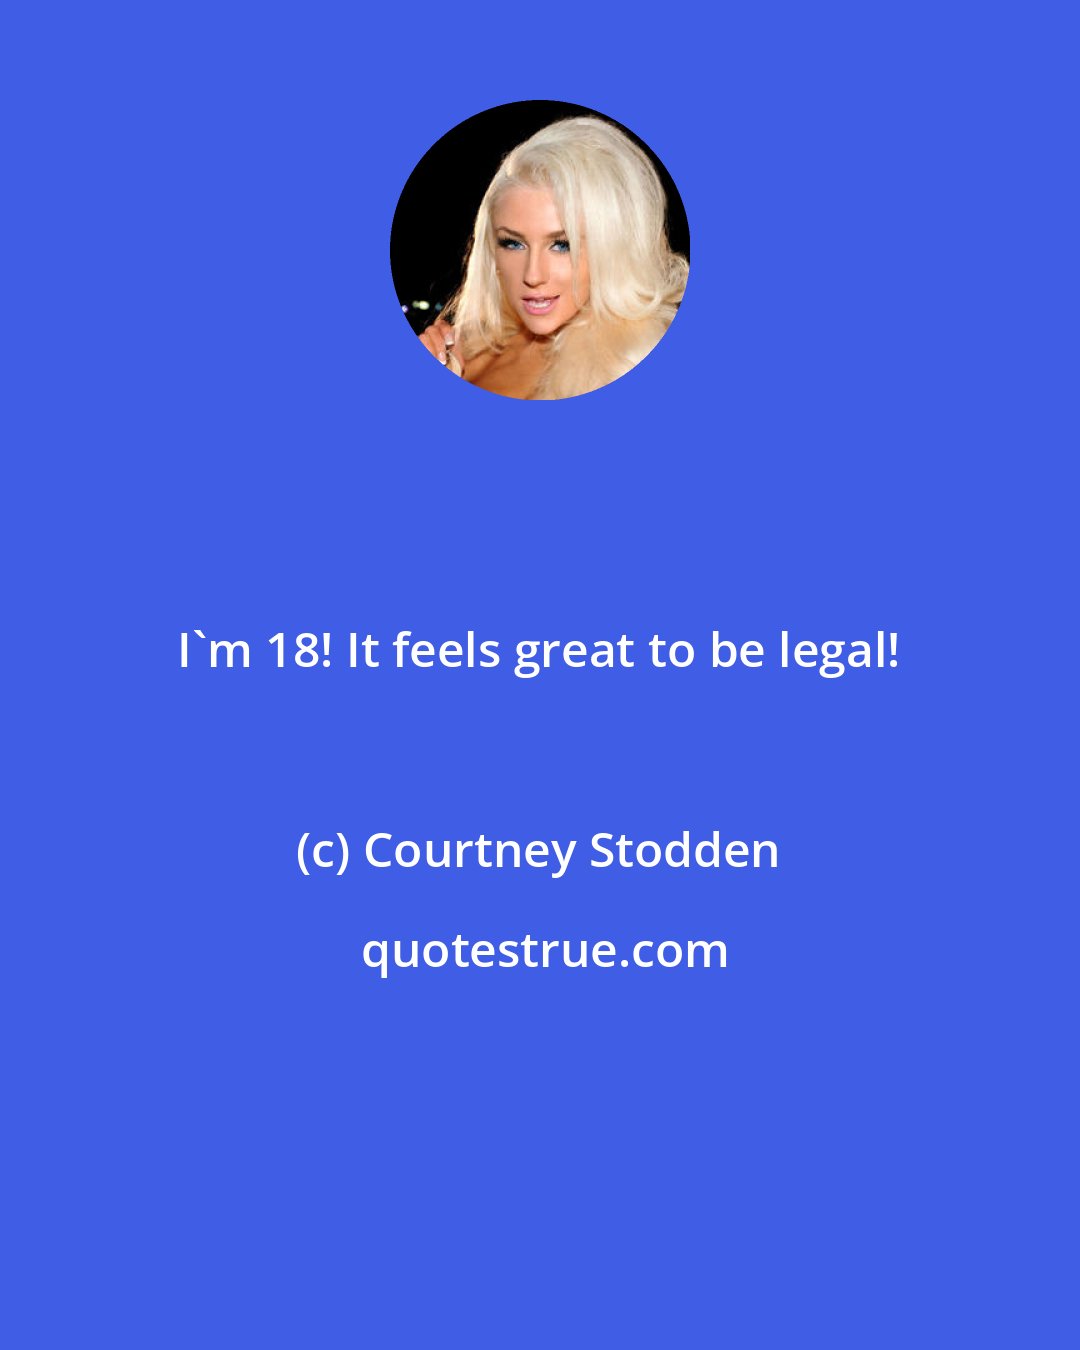 Courtney Stodden: I'm 18! It feels great to be legal!